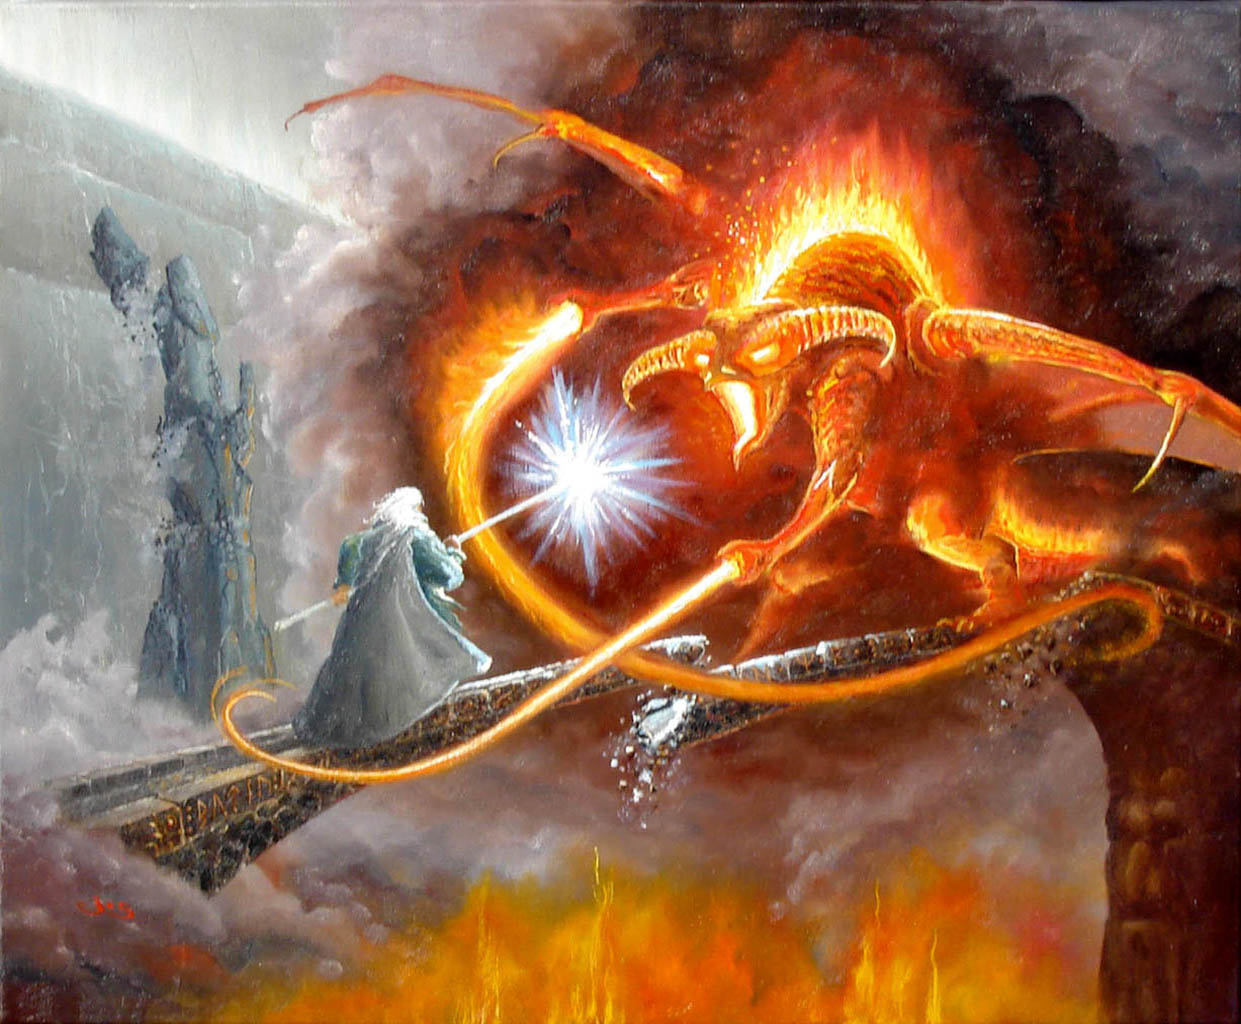 Gandalf and the balrog